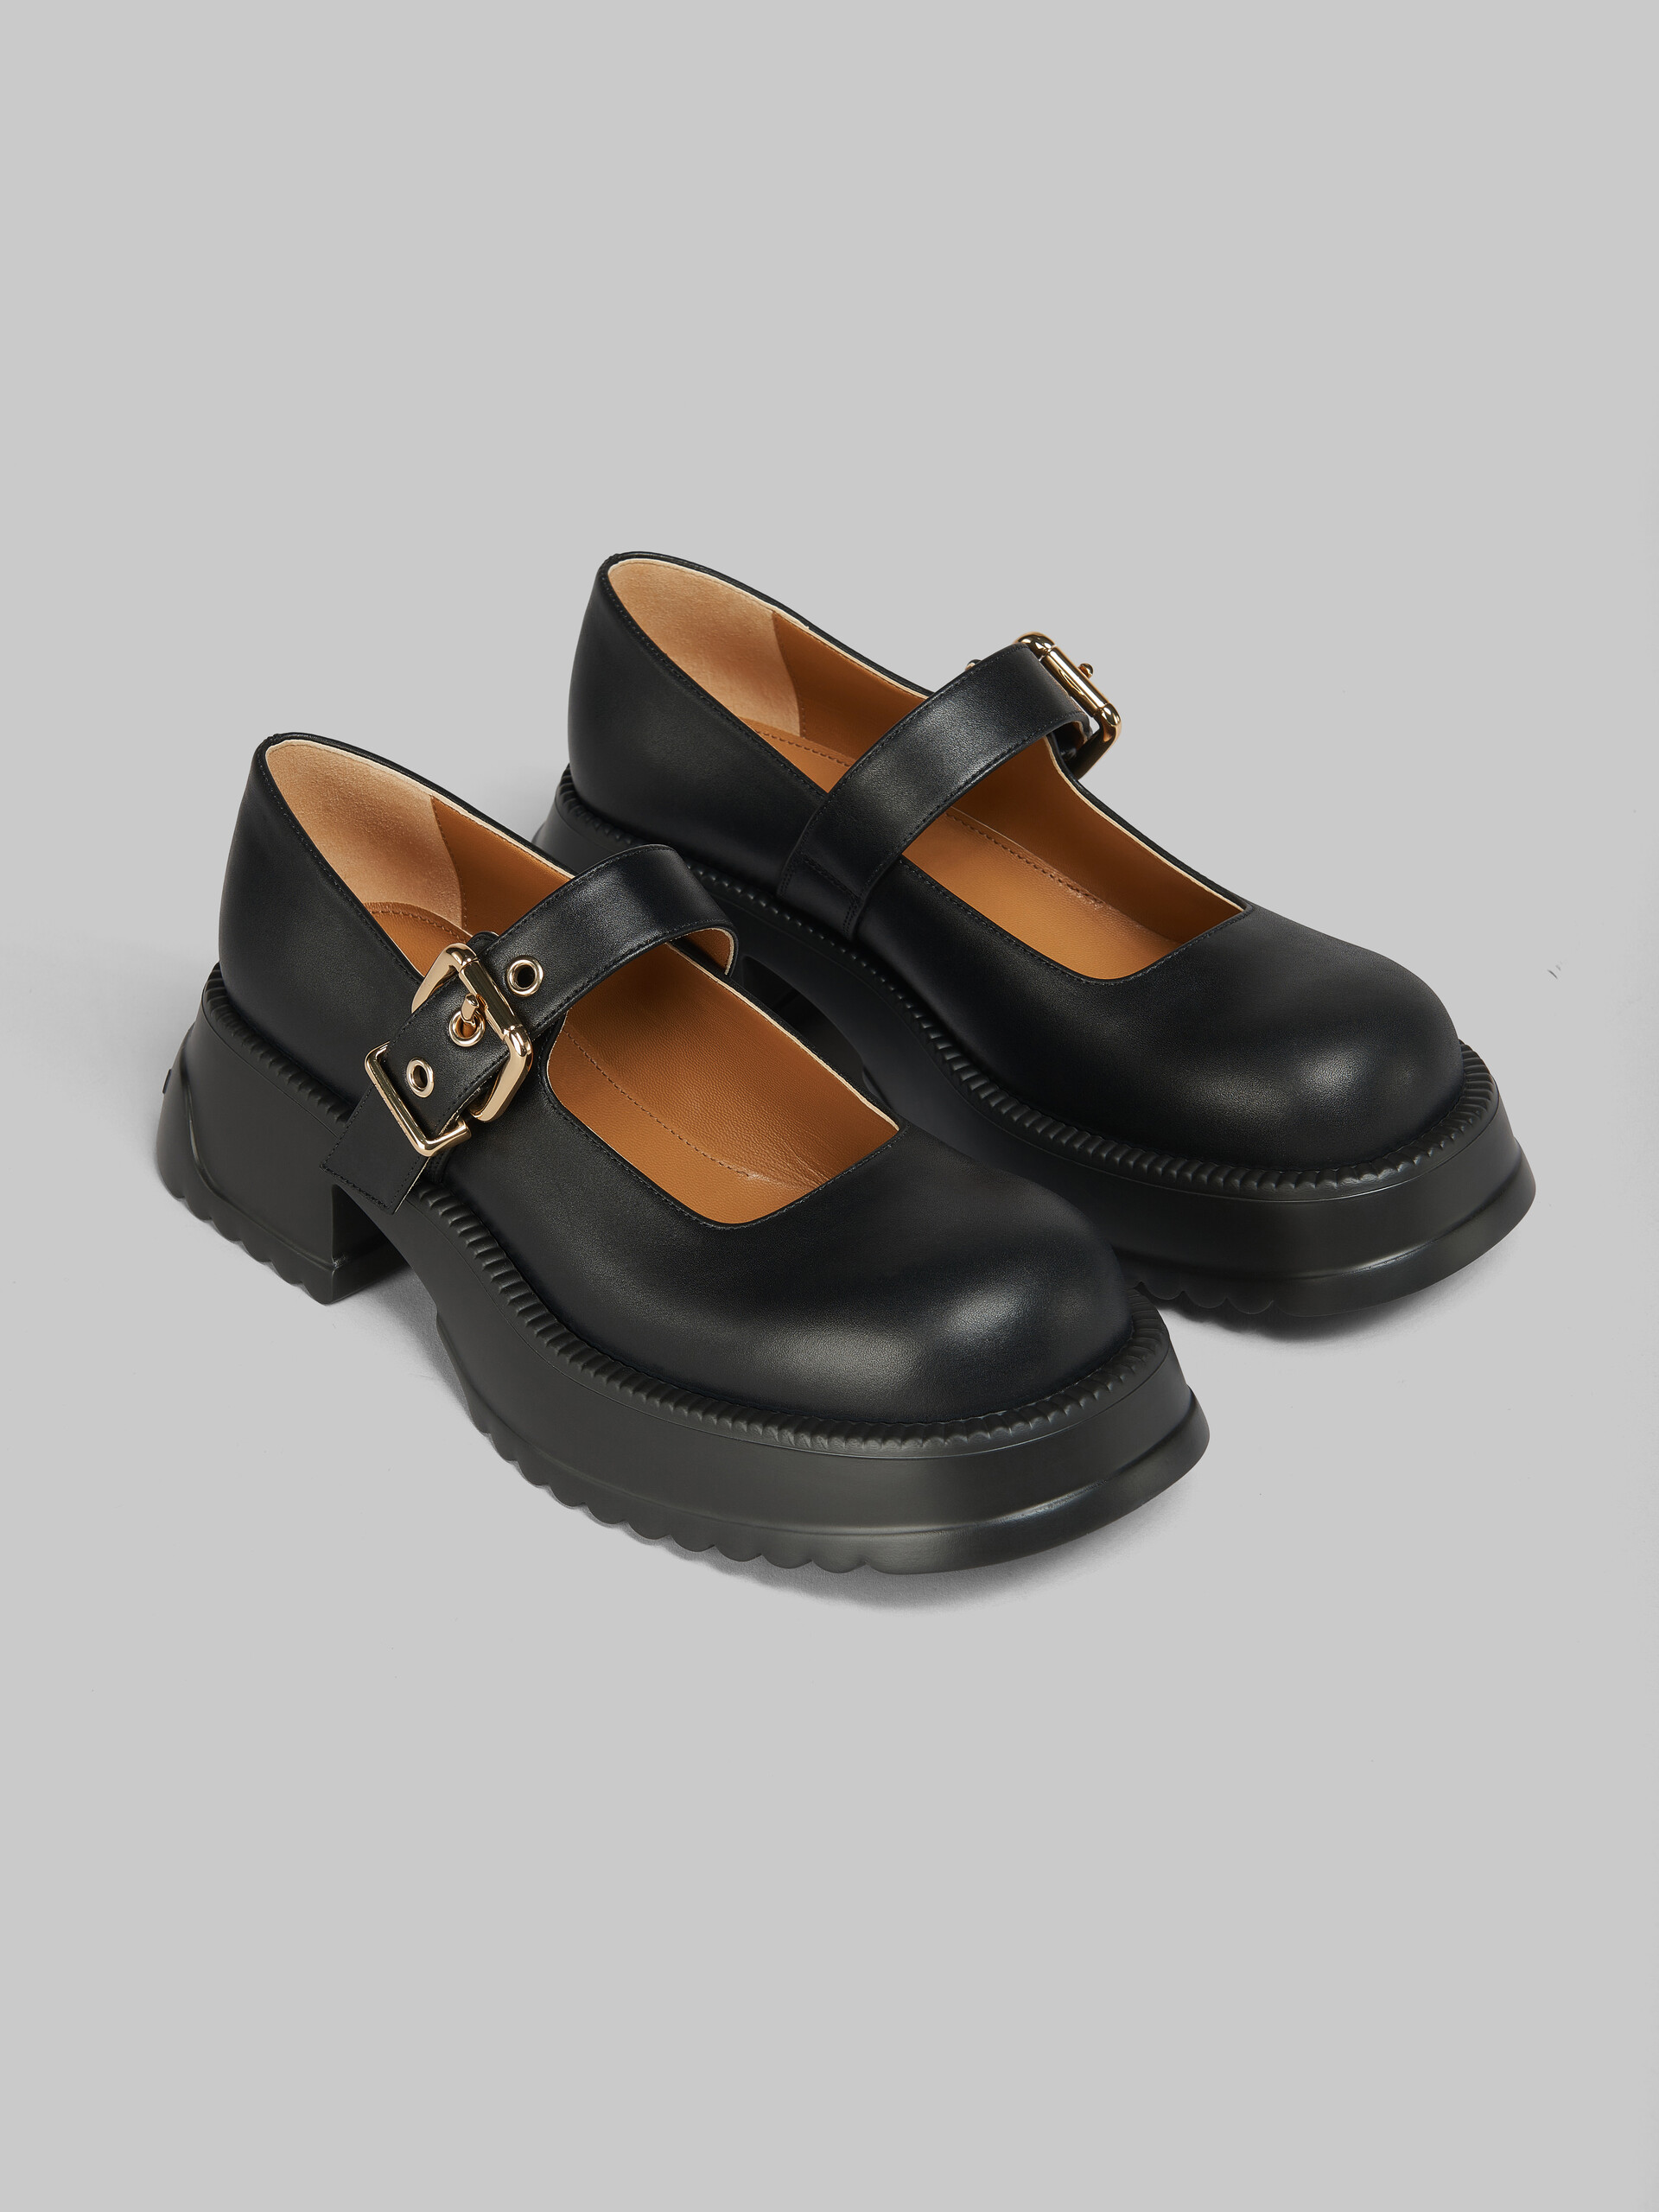 Mary Jane in pelle nera con suola platform - Sneakers - Image 5